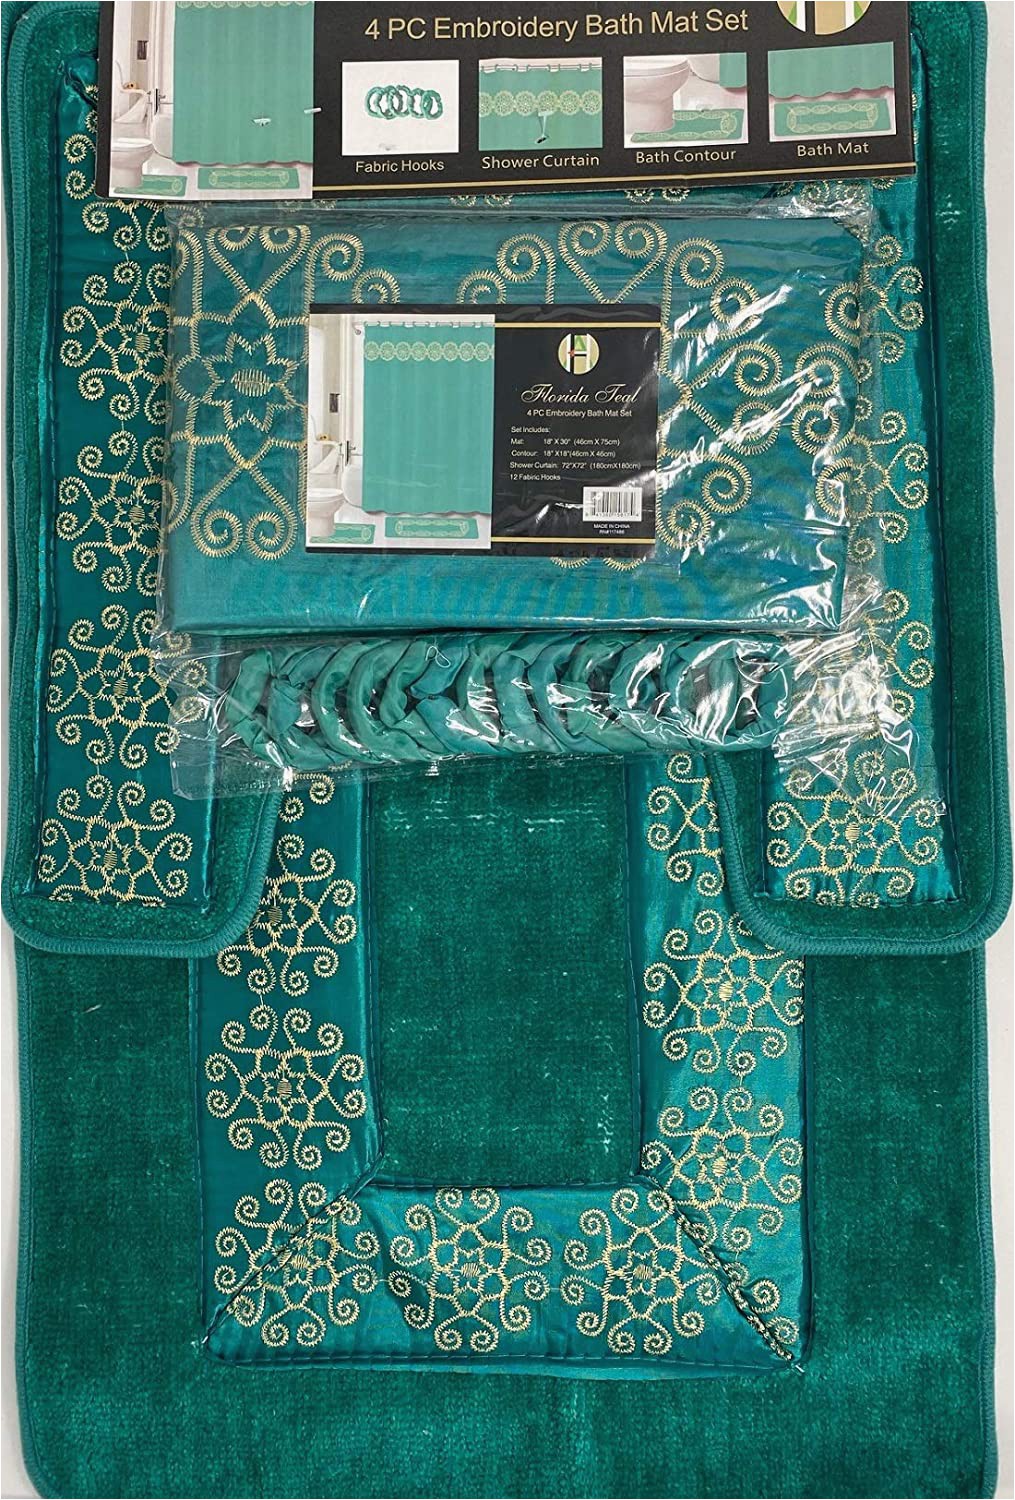 Bathroom Rugs In Teal 4 Piece Bathroom Rugs Set Non Slip Teal Gold Bath Rug toilet Contour Mat with Fabric Shower Curtain and Matching Rings Florida Teal